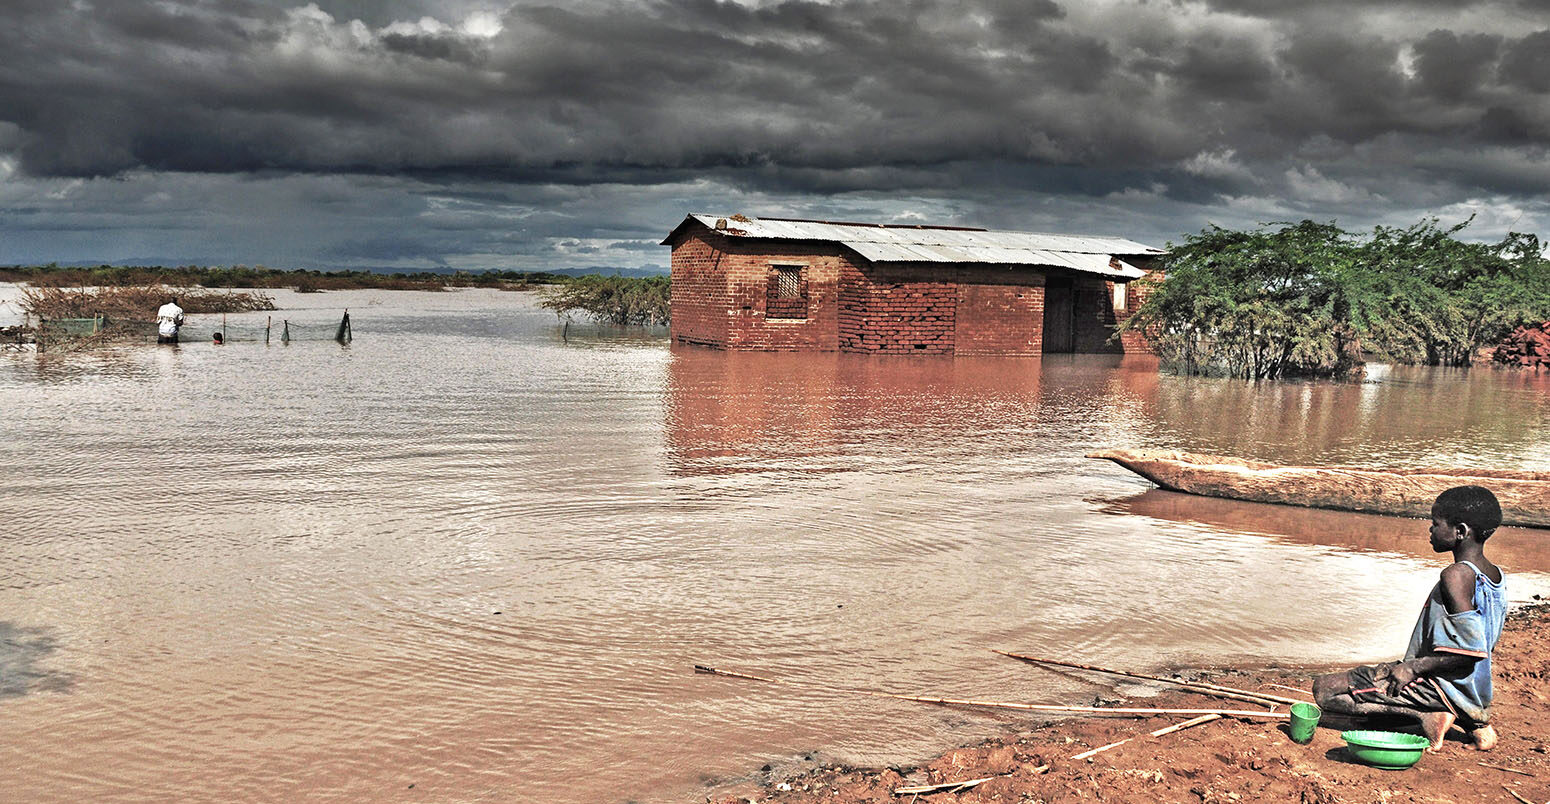 Flooding in Mozambique, Africa, January 2015. Credit: Joel Baxter Photography / Alamy Stock Photo. T63894